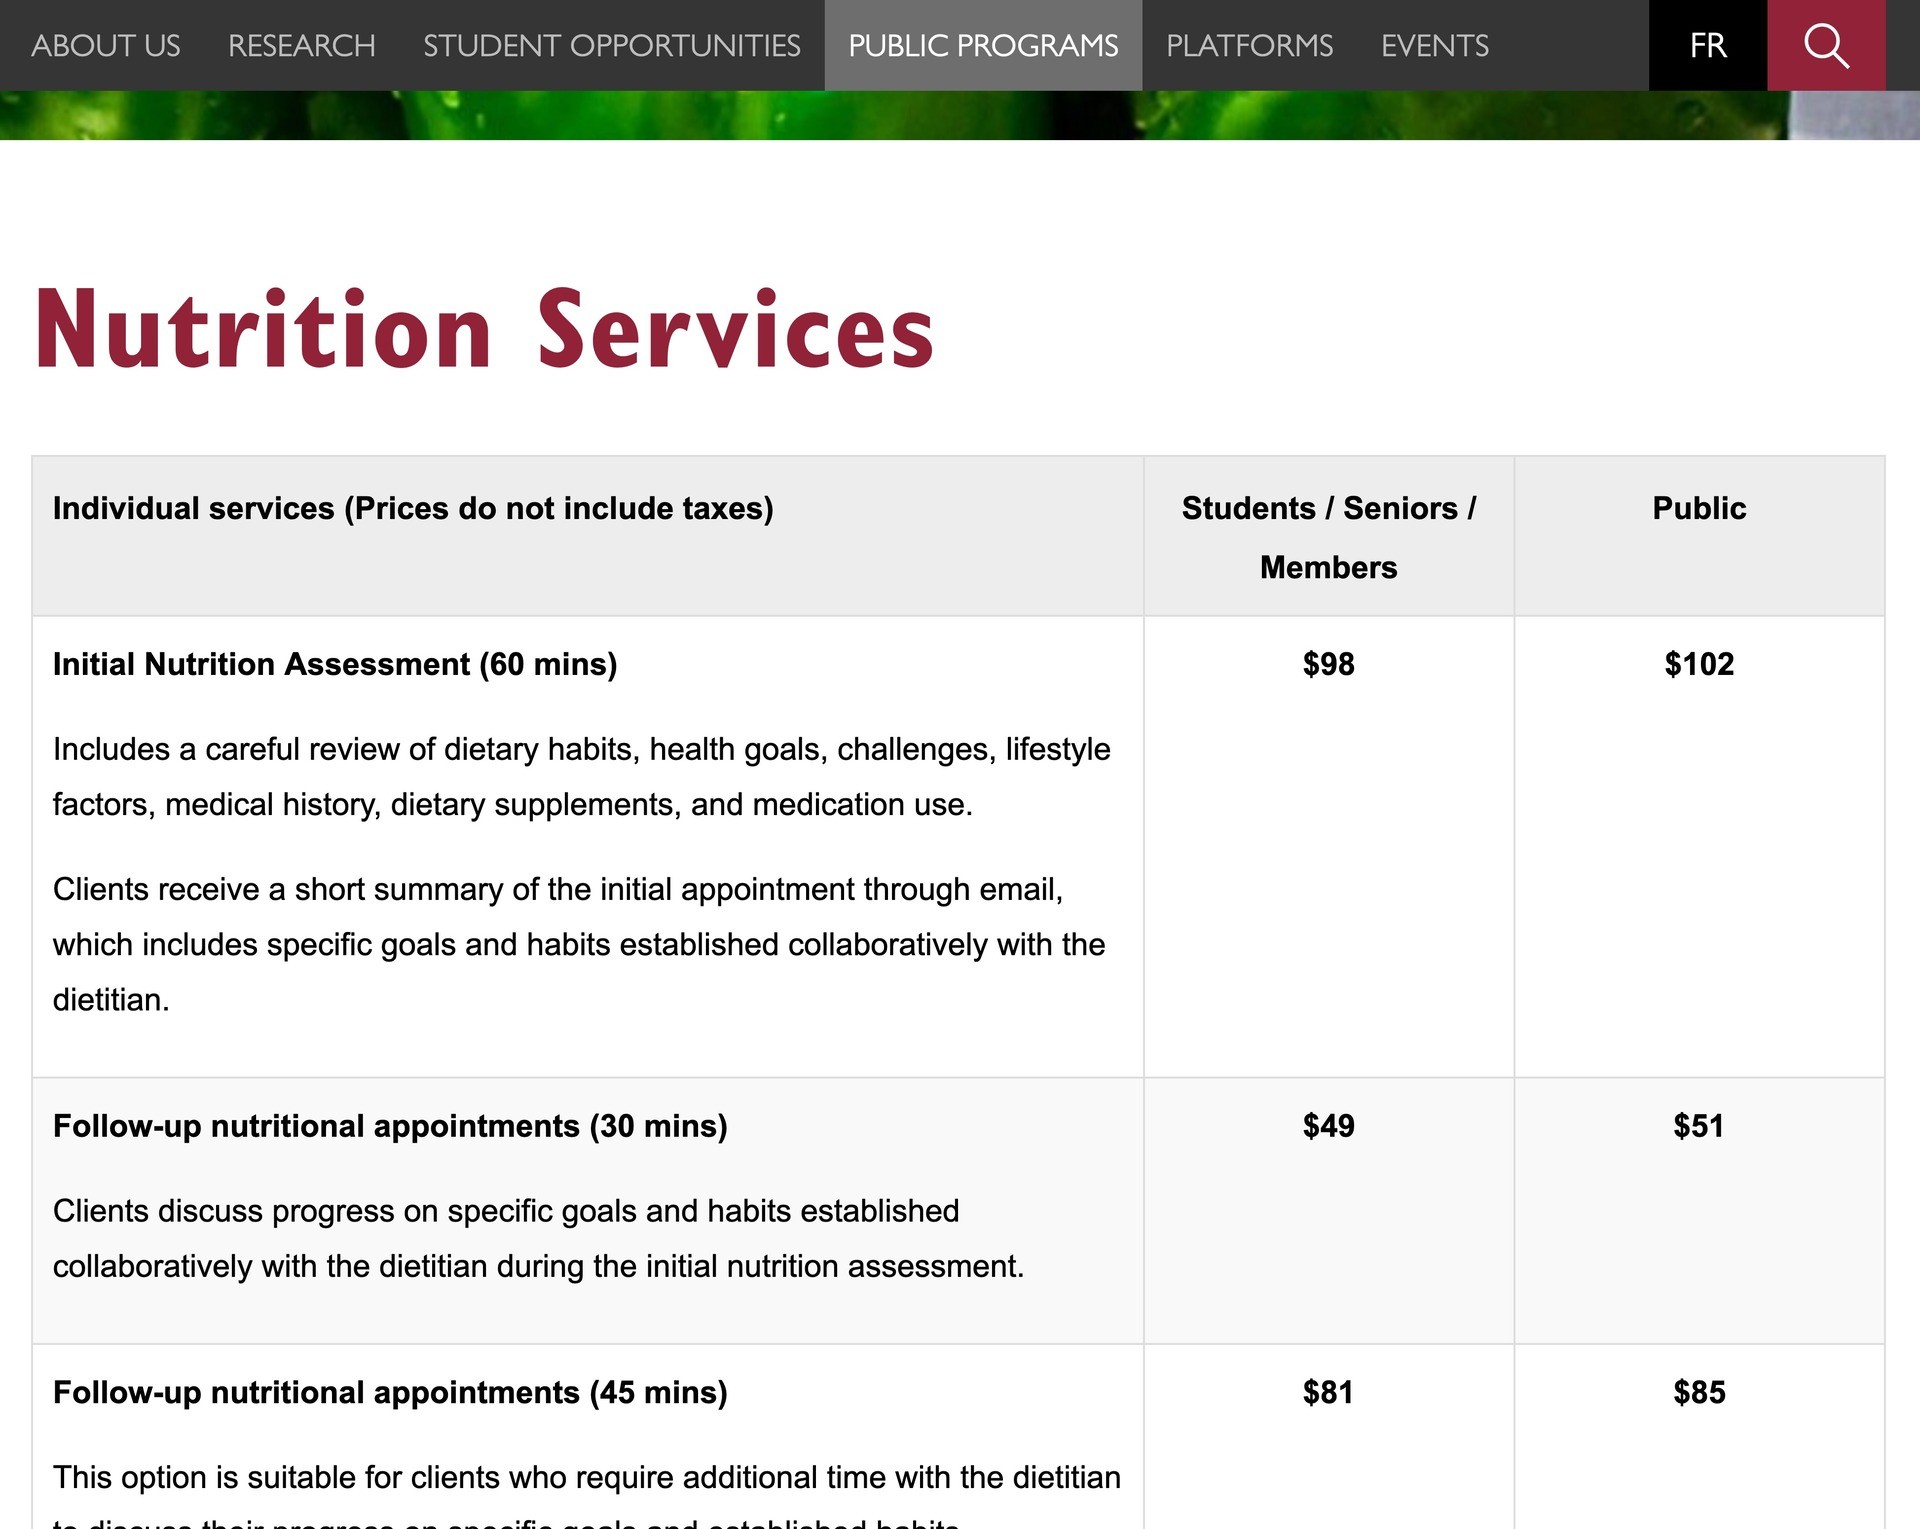 Nutrition services table showing individual services. There are 2 columns for prices: one for students, senios and members; the other for the public